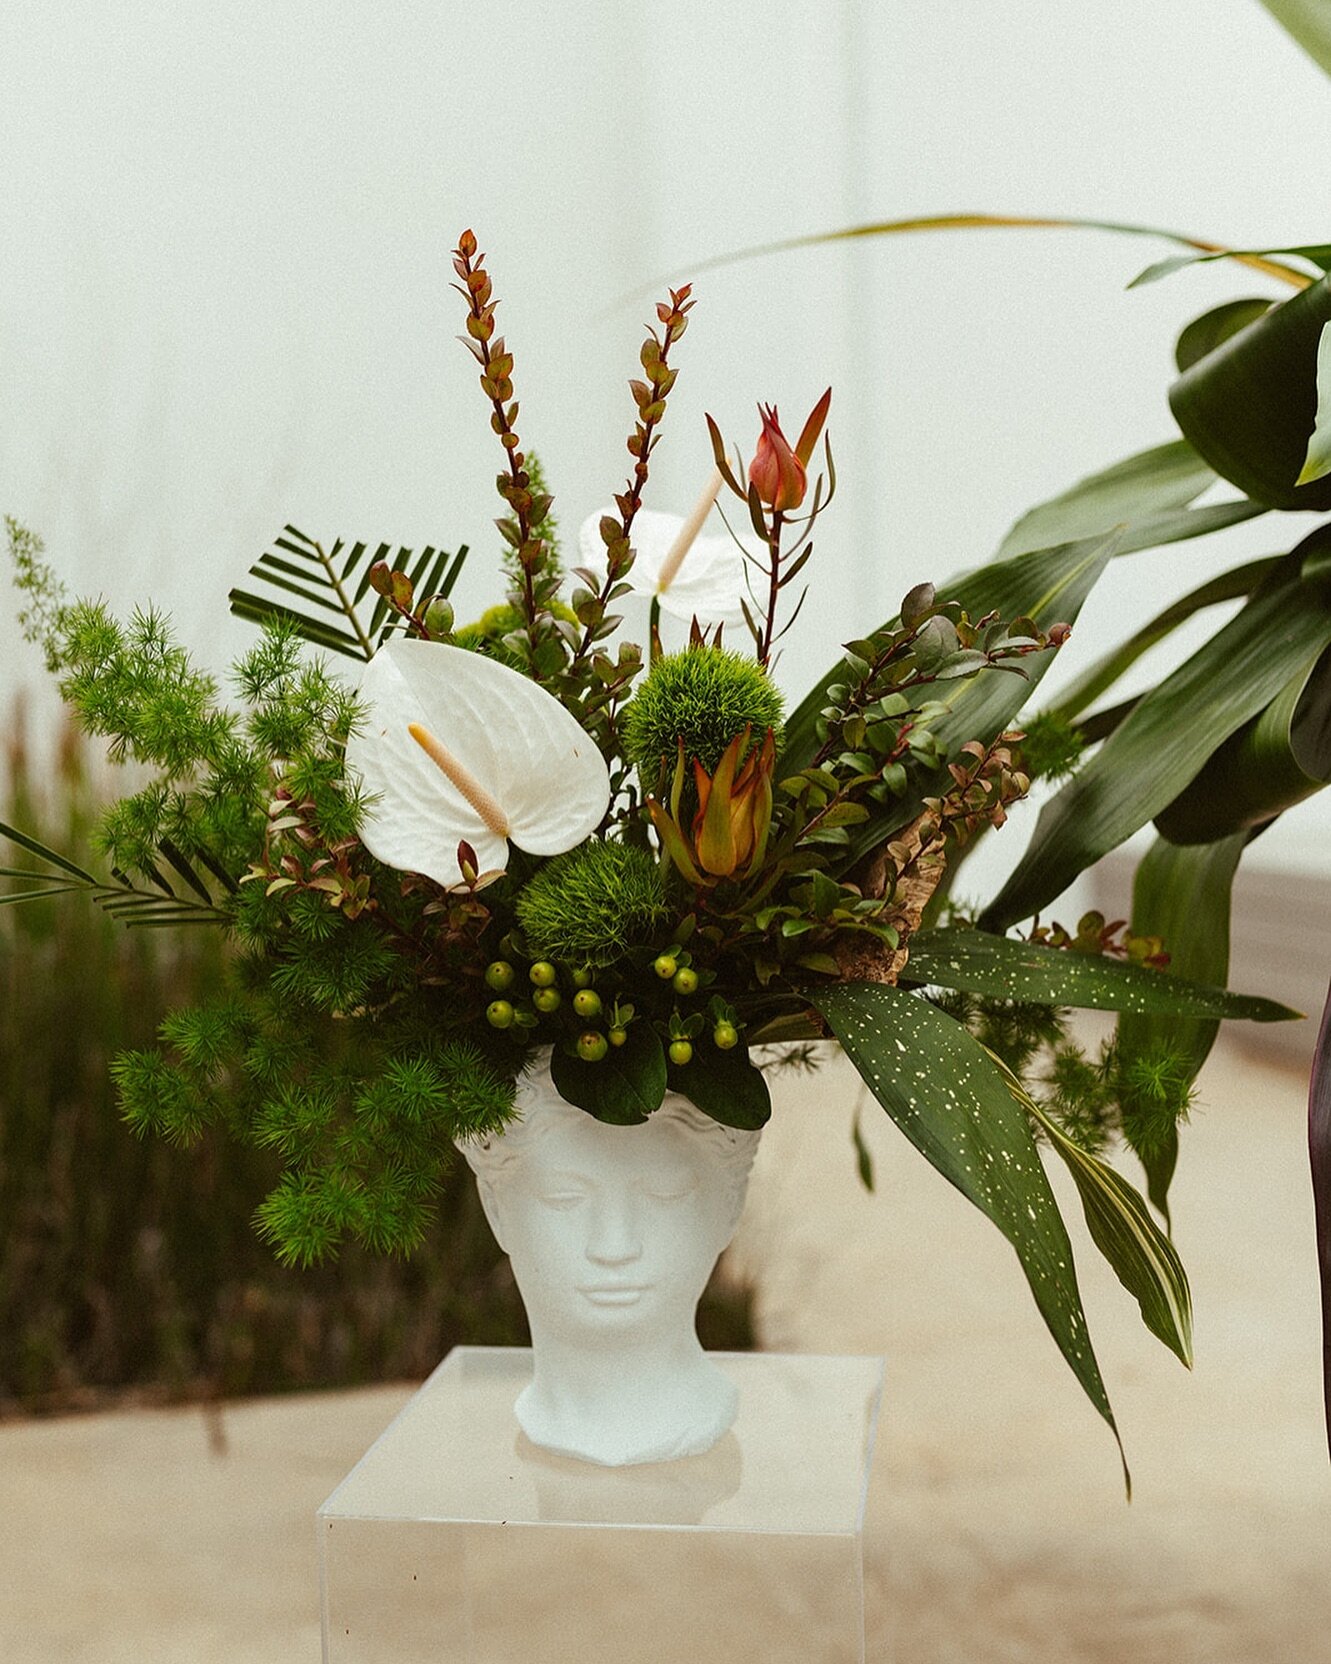 Let&rsquo;s root for one another and watch each other grow 🌿

At The Plant Venue, we love connecting event hosts with quality vendors to bring their unique event to life! Now available on the website, the online Vendor Directory features a great lis